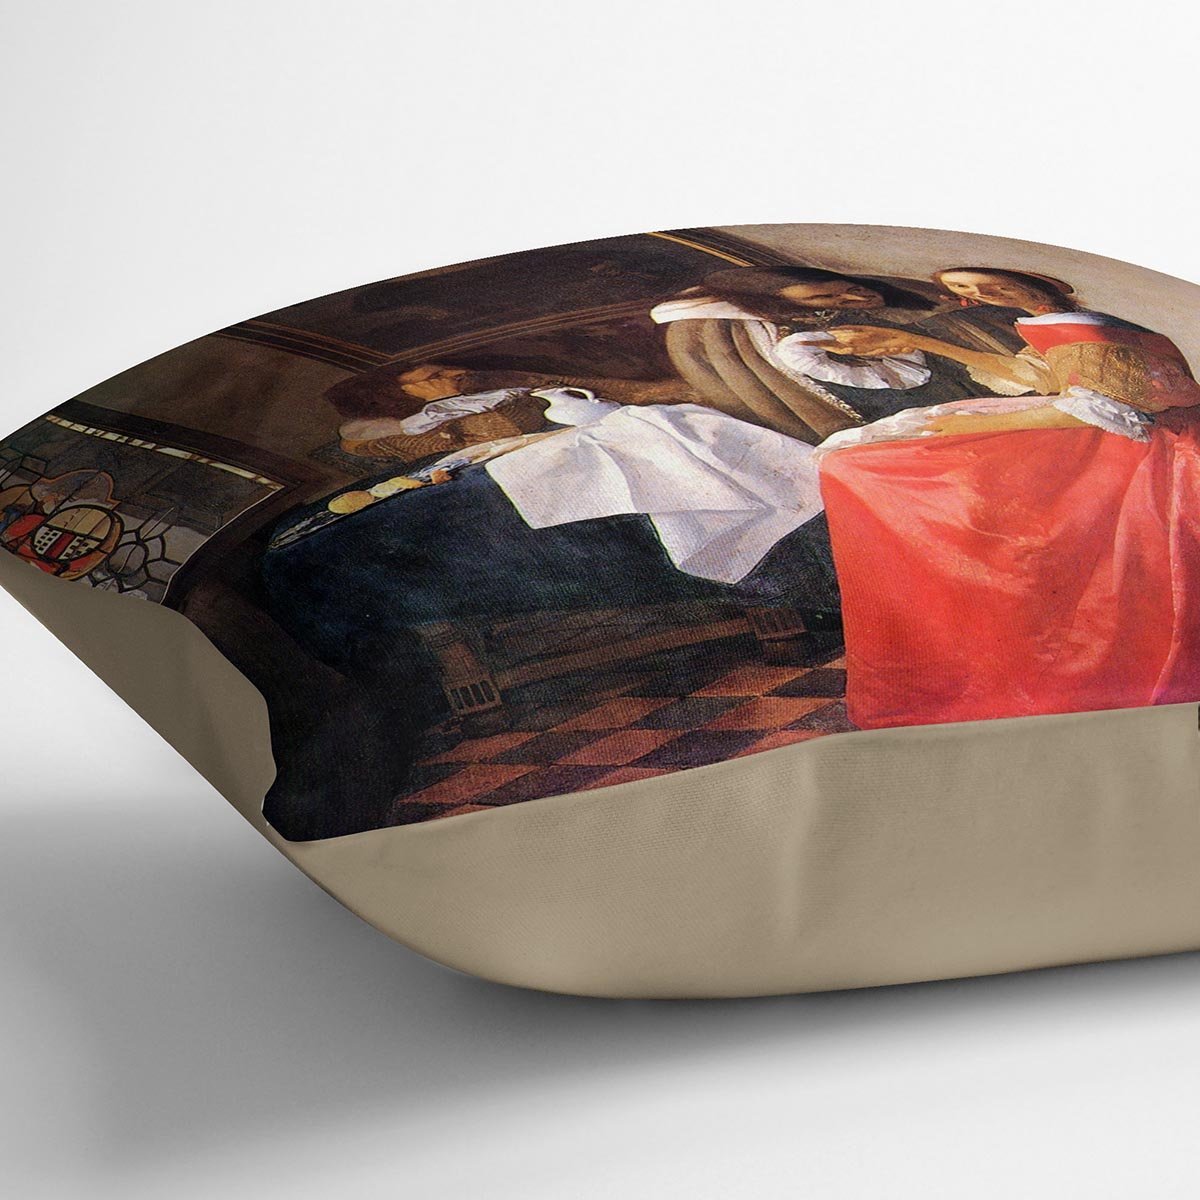 Girl with a wine glass by Vermeer Cushion